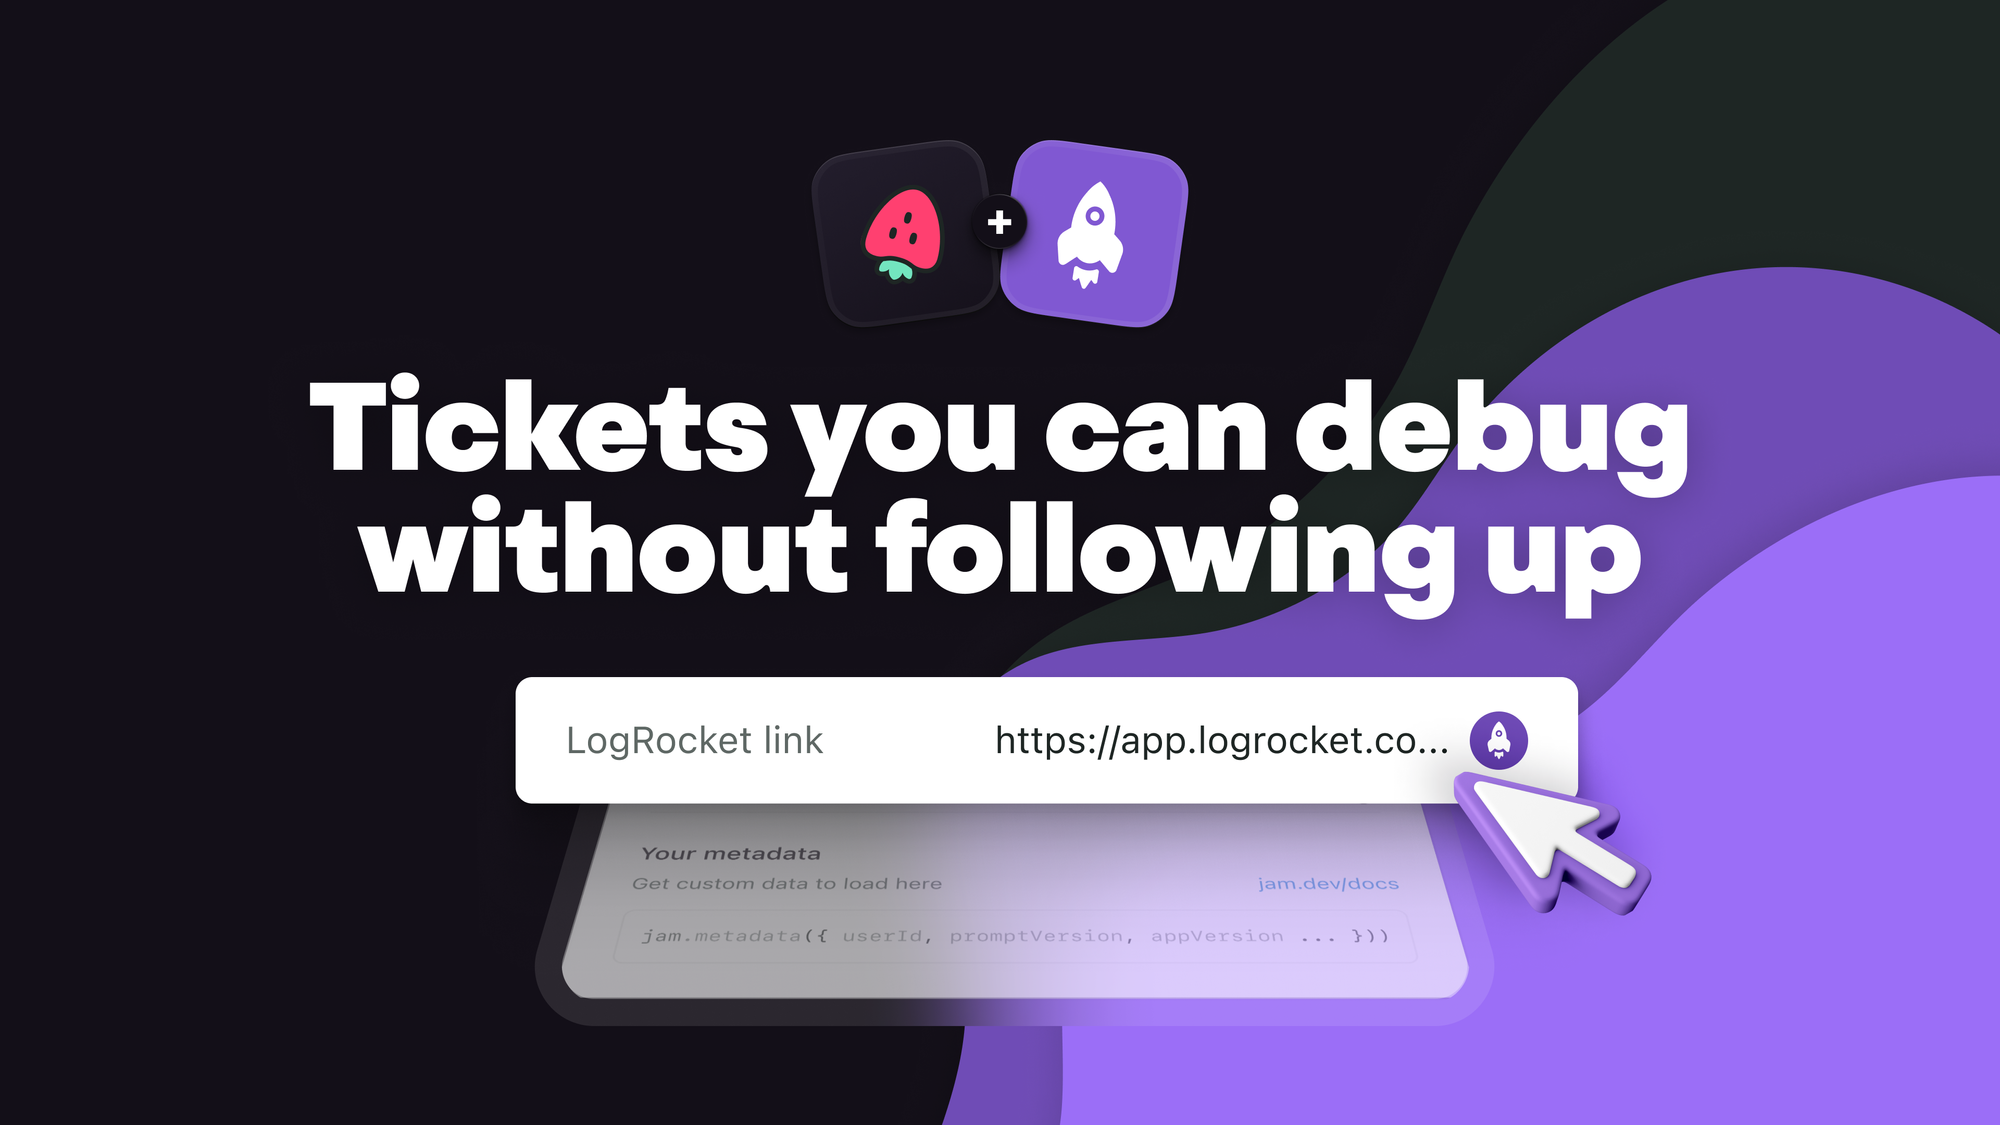 Just launched! Even more debug data auto-included with Jam + LogRocket